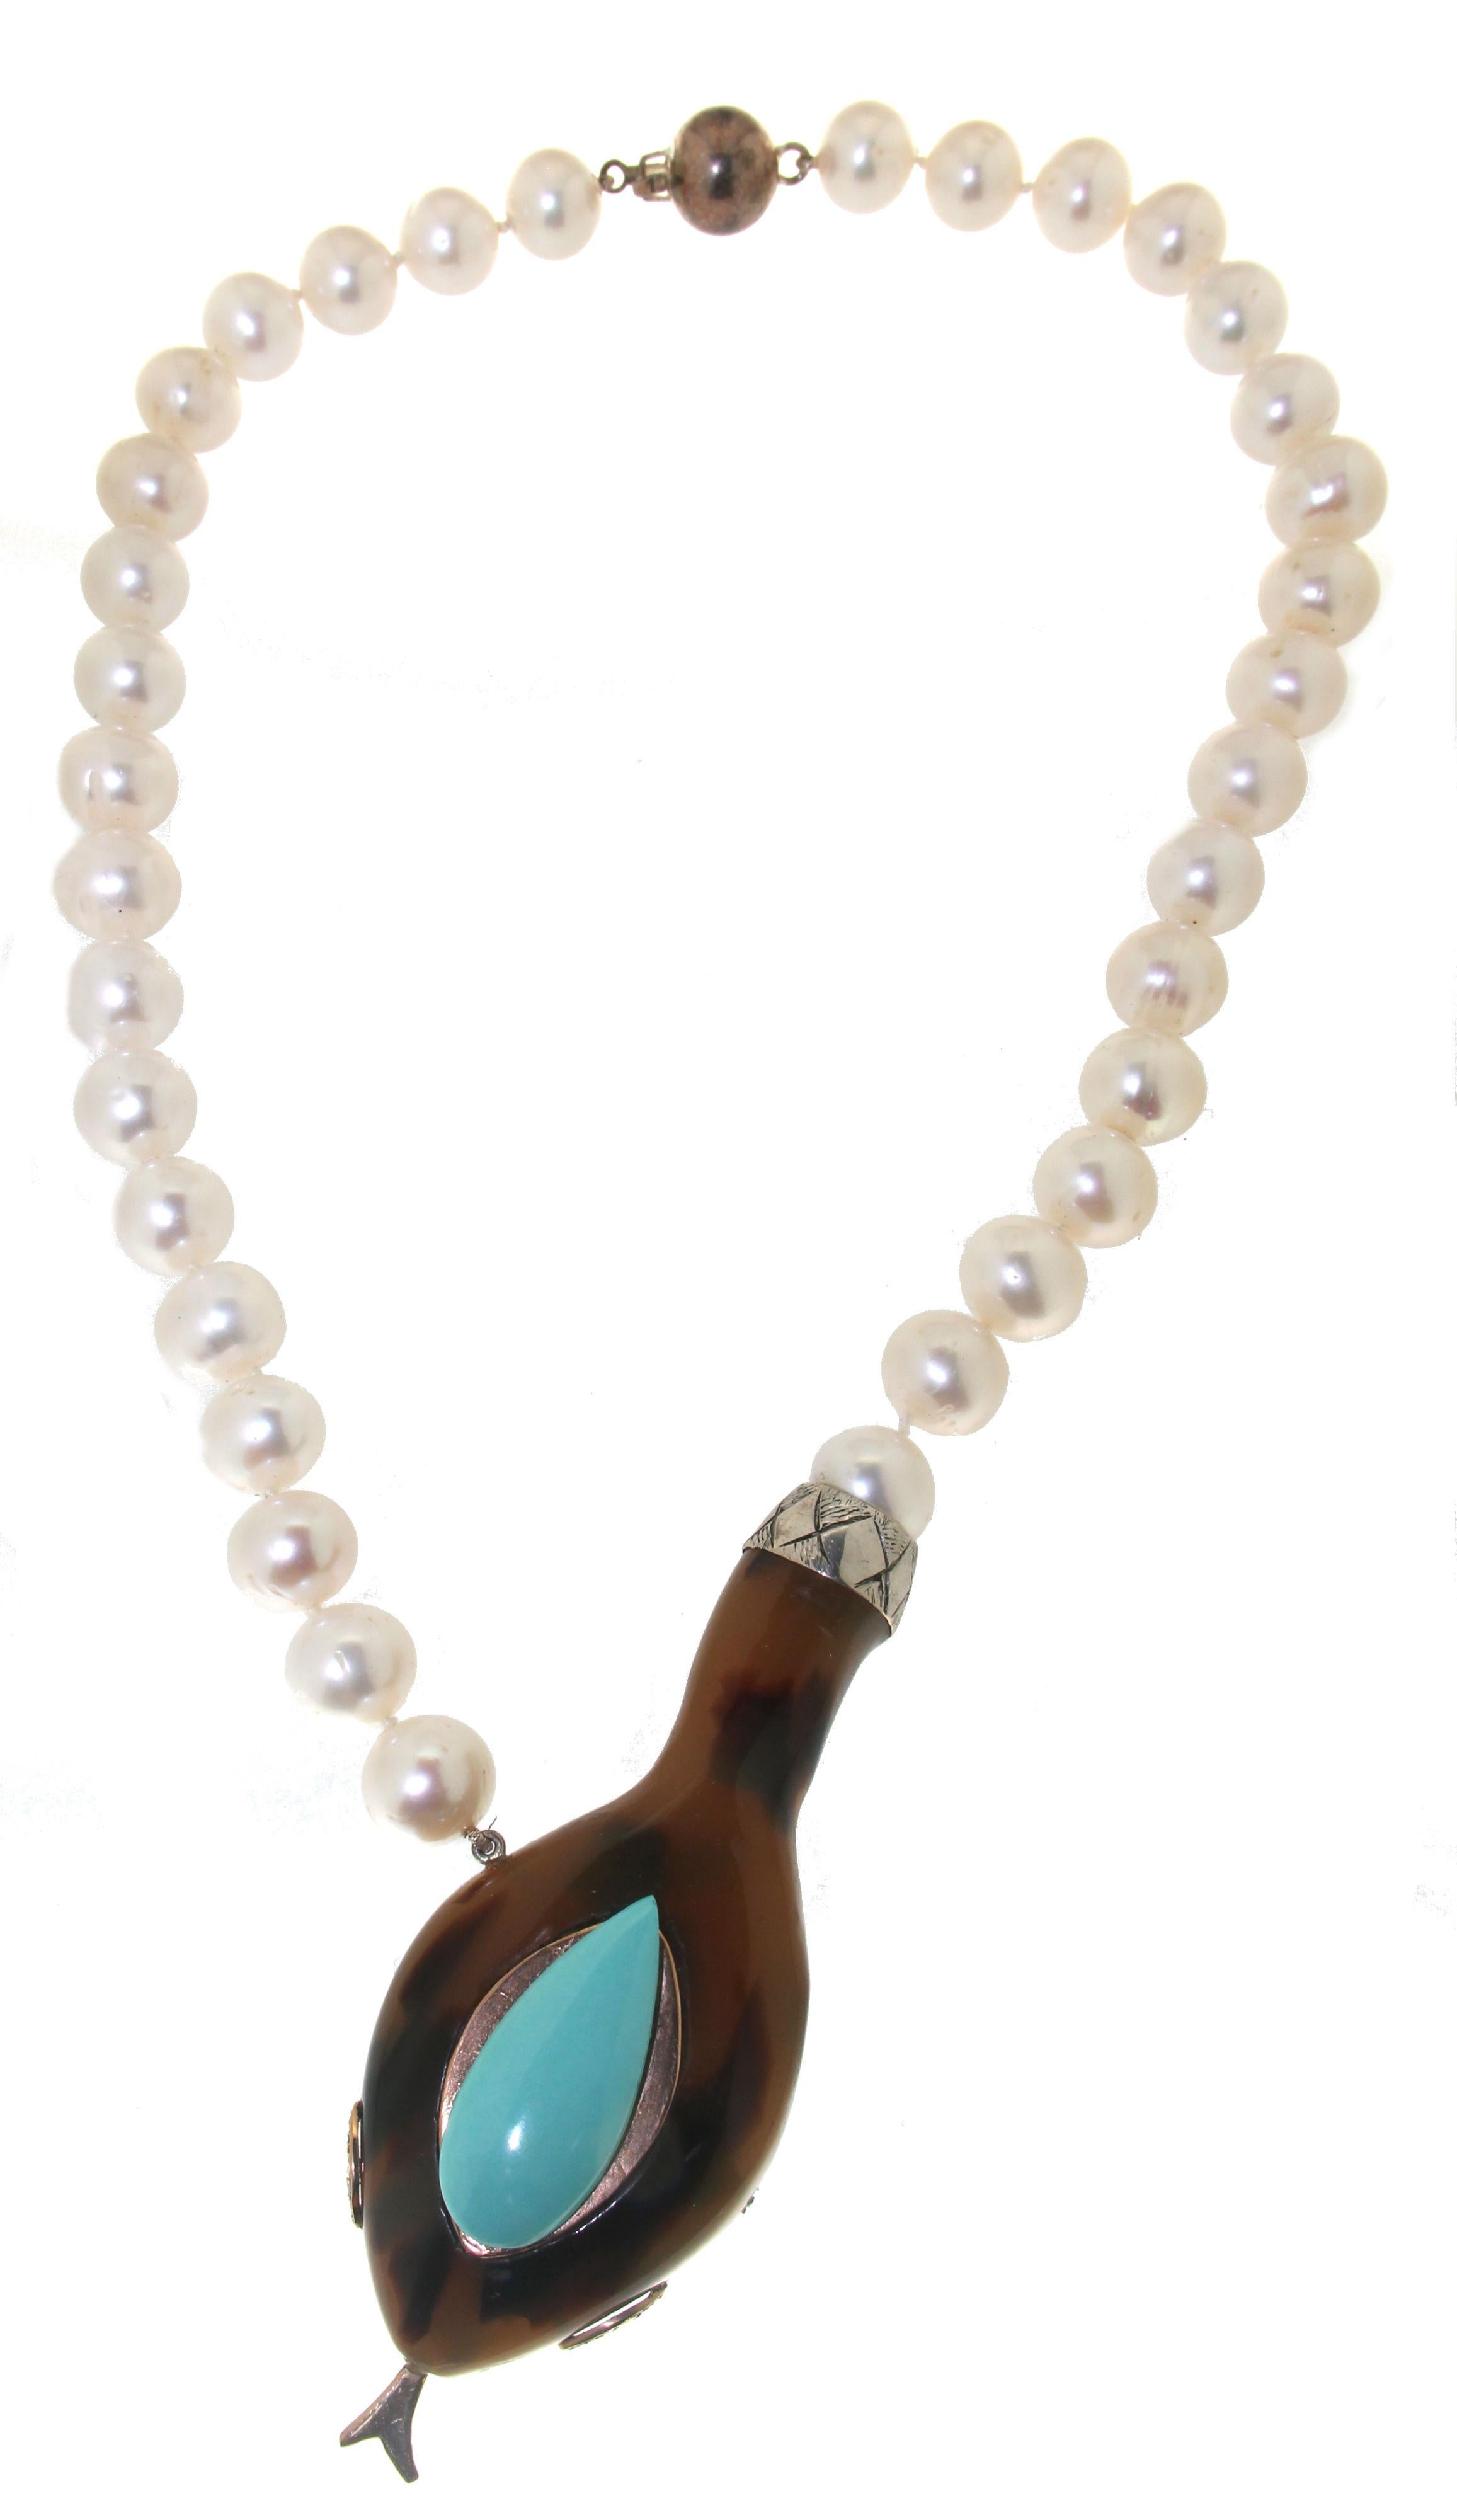 9 karat yellow gold and 800 thousandths silver drop necklace. Handmade by our craftsmen assembled with freshwater pearls,turquoise.diamonds and galalith snake.

Pearls size 11 mm
Diamonds weight 0.06 karat
Turquoise weight 2.10 grams
Necklace total